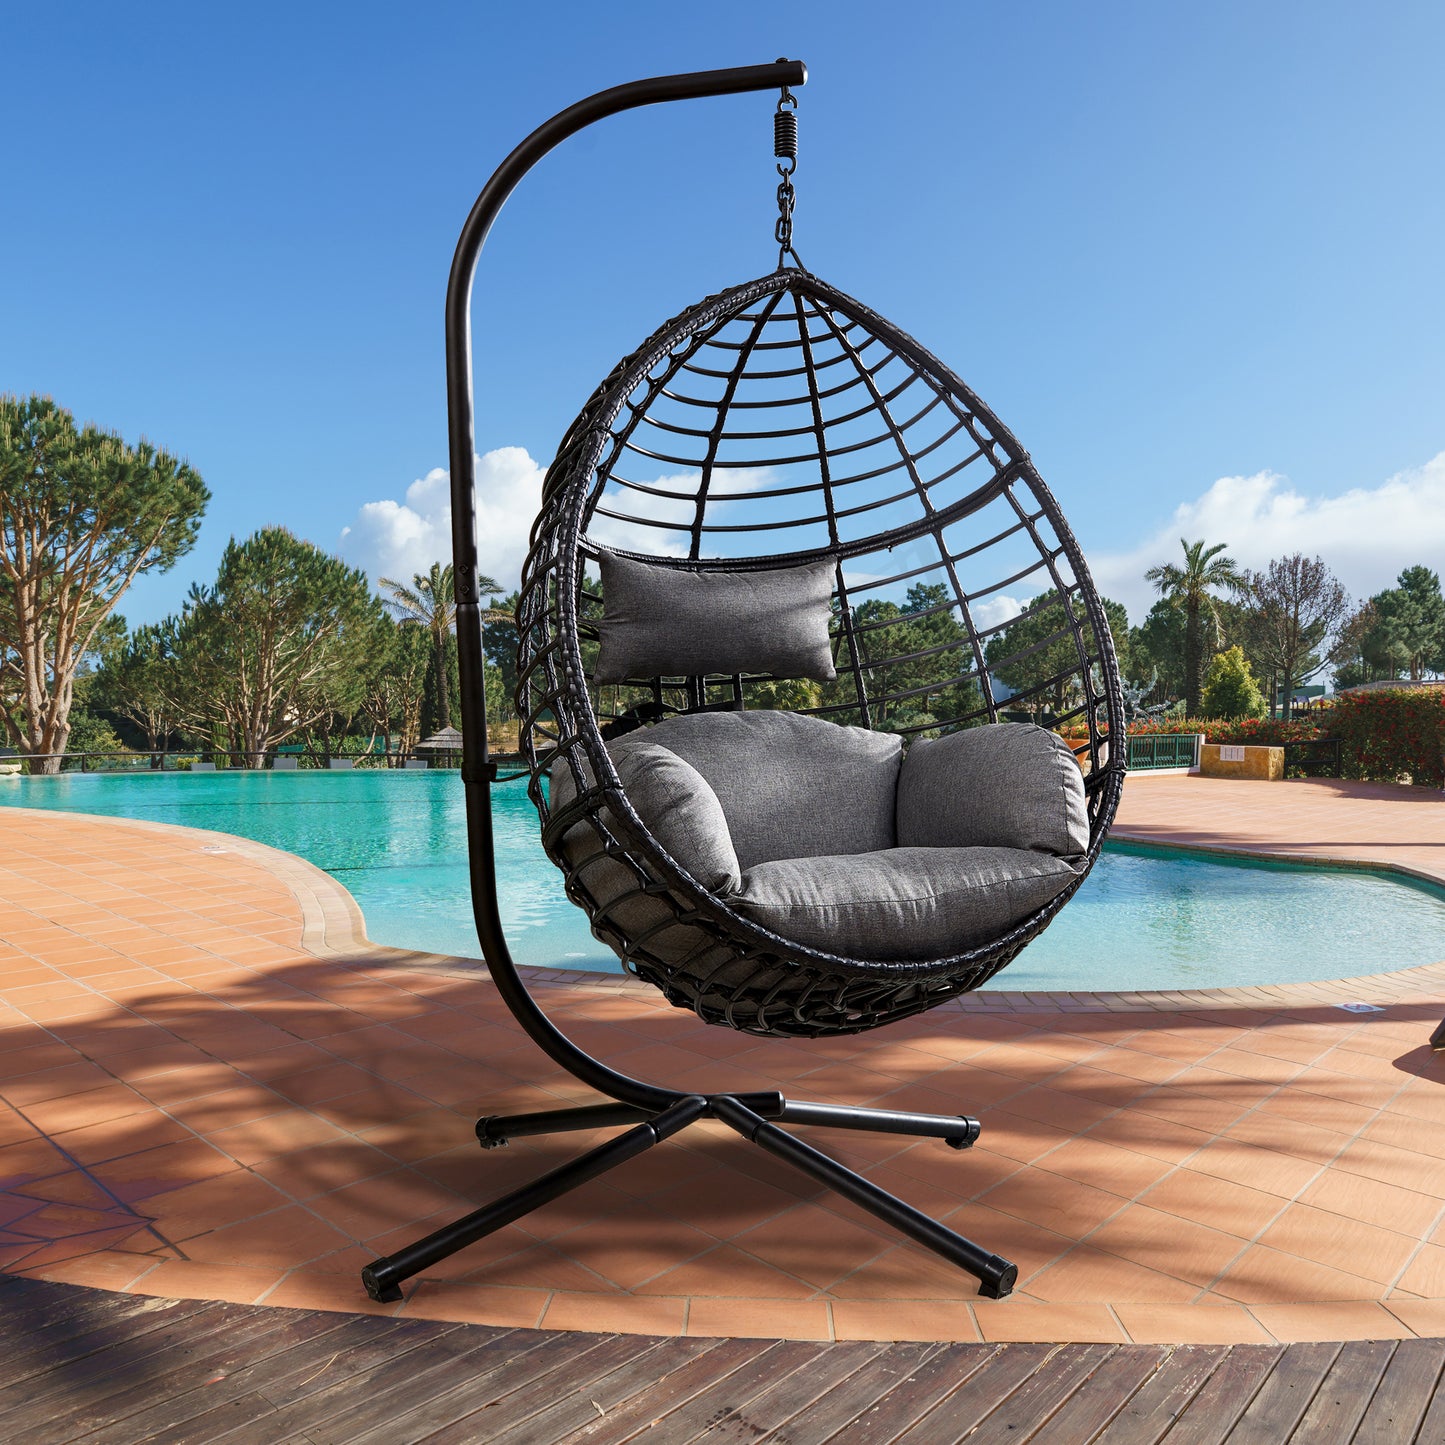 Gray Egg Swing Chair with Stand